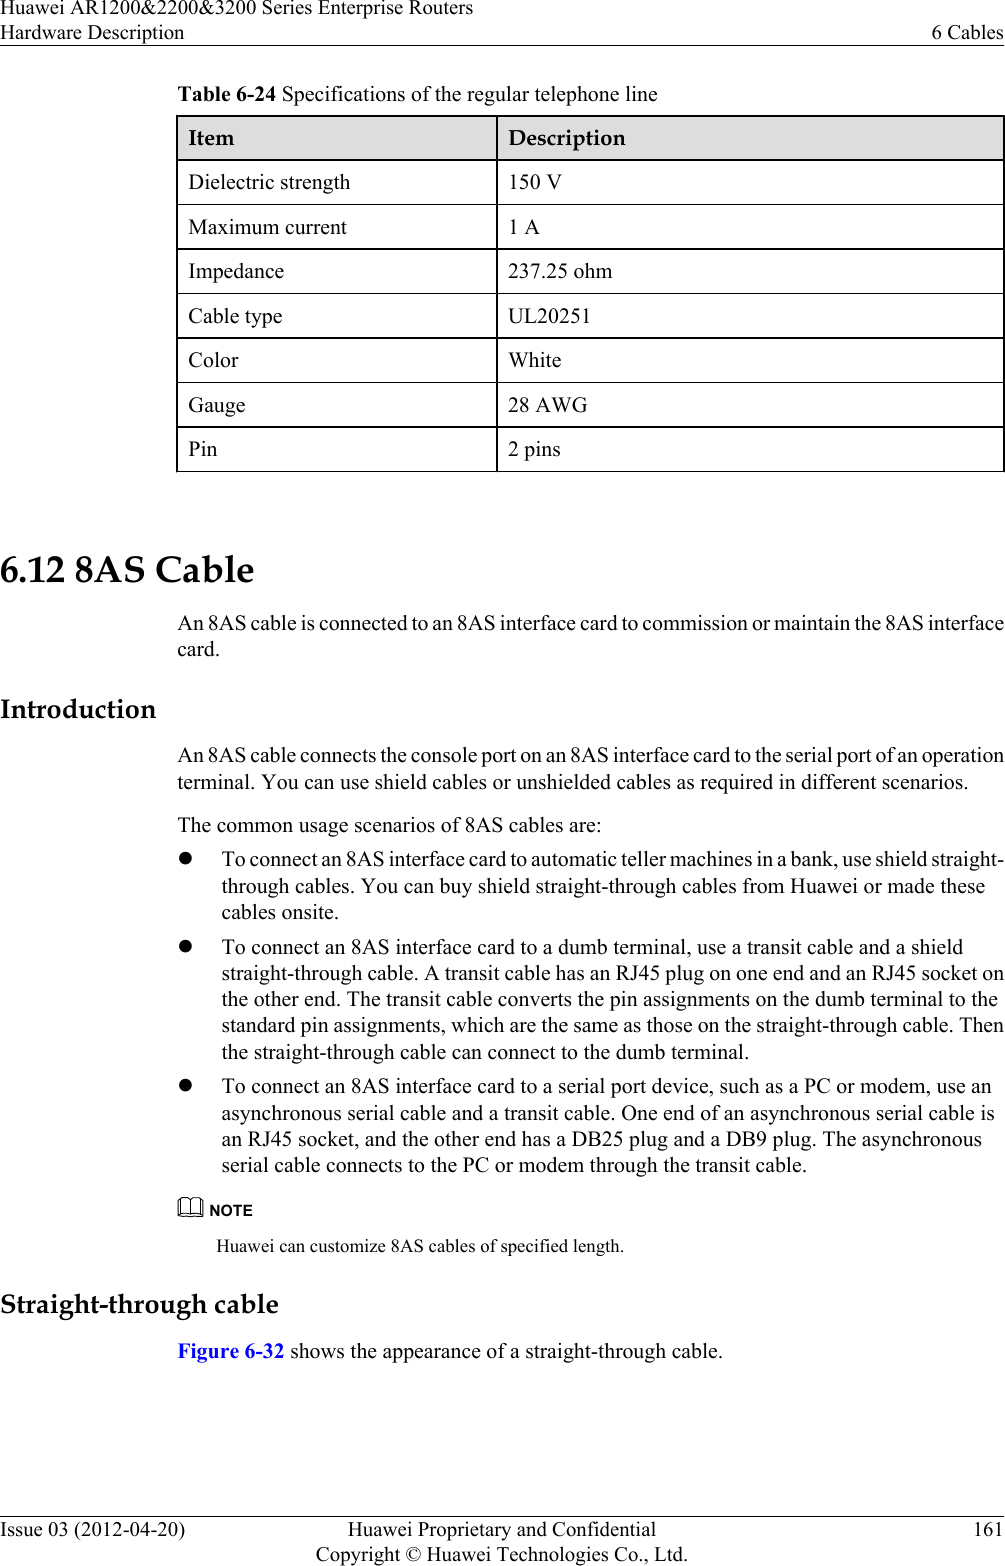 Table 6-24 Specifications of the regular telephone lineItem DescriptionDielectric strength 150 VMaximum current 1 AImpedance 237.25 ohmCable type UL20251Color WhiteGauge 28 AWGPin 2 pins 6.12 8AS CableAn 8AS cable is connected to an 8AS interface card to commission or maintain the 8AS interfacecard.IntroductionAn 8AS cable connects the console port on an 8AS interface card to the serial port of an operationterminal. You can use shield cables or unshielded cables as required in different scenarios.The common usage scenarios of 8AS cables are:lTo connect an 8AS interface card to automatic teller machines in a bank, use shield straight-through cables. You can buy shield straight-through cables from Huawei or made thesecables onsite.lTo connect an 8AS interface card to a dumb terminal, use a transit cable and a shieldstraight-through cable. A transit cable has an RJ45 plug on one end and an RJ45 socket onthe other end. The transit cable converts the pin assignments on the dumb terminal to thestandard pin assignments, which are the same as those on the straight-through cable. Thenthe straight-through cable can connect to the dumb terminal.lTo connect an 8AS interface card to a serial port device, such as a PC or modem, use anasynchronous serial cable and a transit cable. One end of an asynchronous serial cable isan RJ45 socket, and the other end has a DB25 plug and a DB9 plug. The asynchronousserial cable connects to the PC or modem through the transit cable.NOTEHuawei can customize 8AS cables of specified length.Straight-through cableFigure 6-32 shows the appearance of a straight-through cable.Huawei AR1200&amp;2200&amp;3200 Series Enterprise RoutersHardware Description 6 CablesIssue 03 (2012-04-20) Huawei Proprietary and ConfidentialCopyright © Huawei Technologies Co., Ltd.161